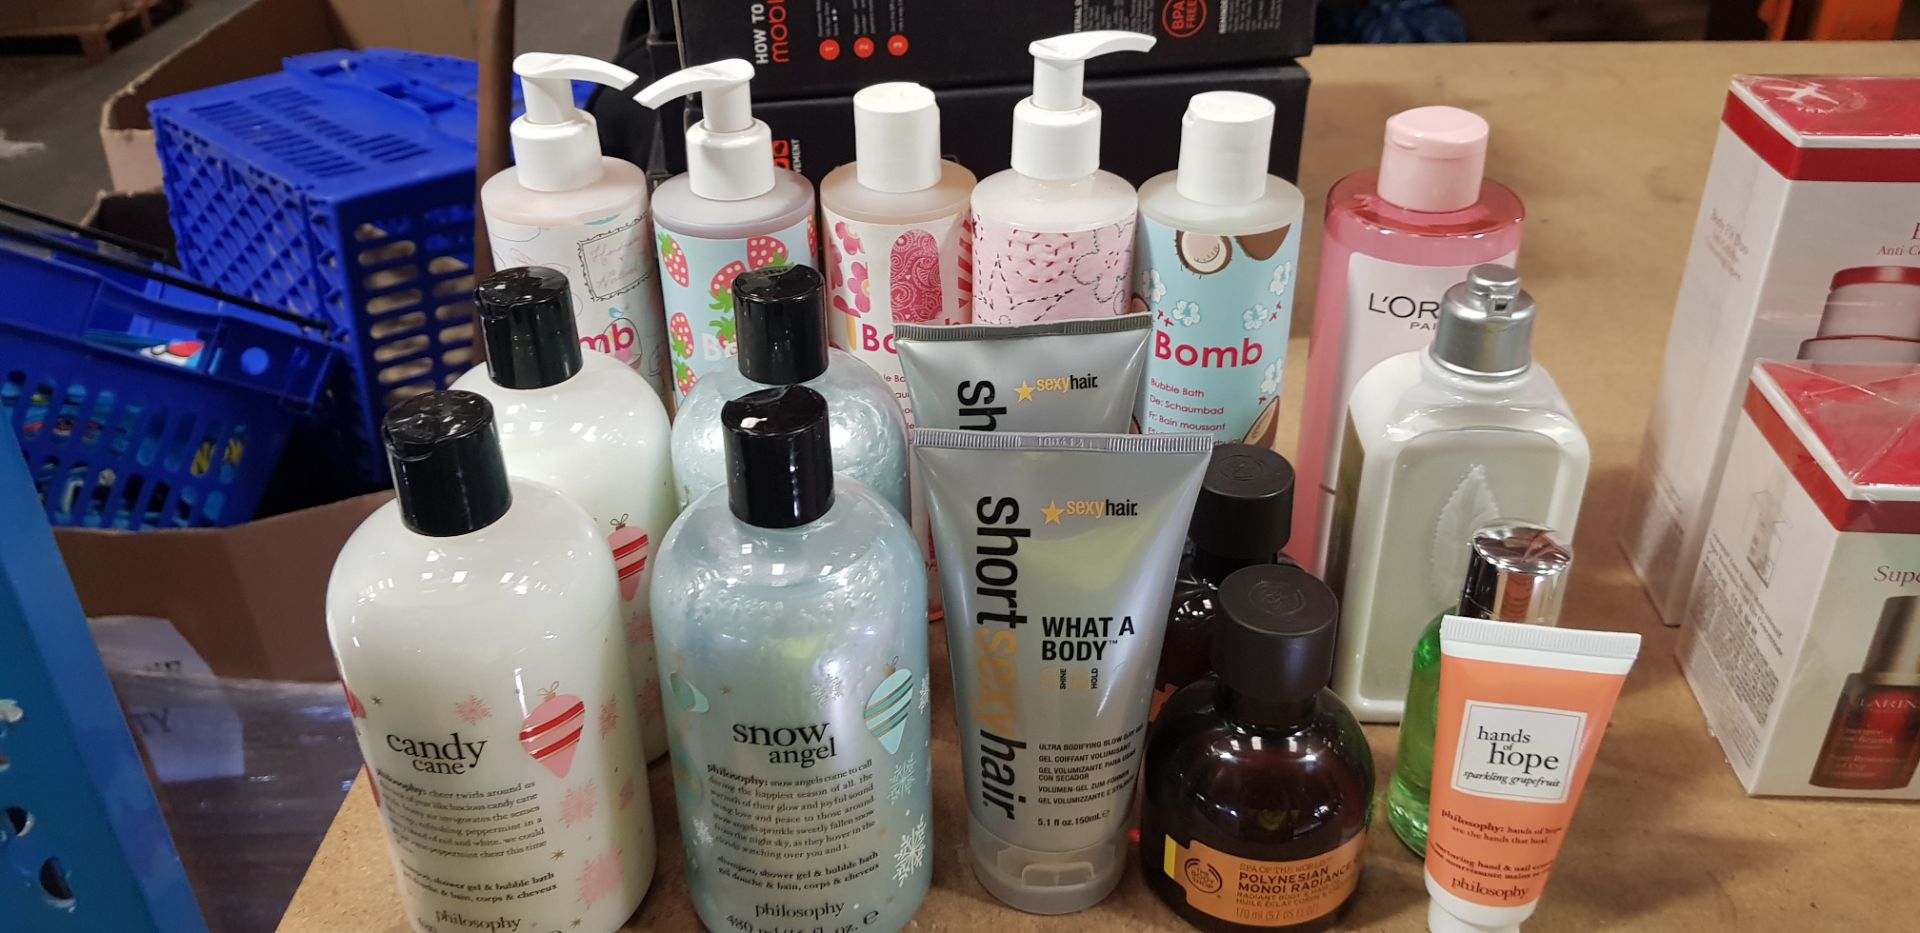 17 PIECE MIXED LOT TO CONTAIN BOMB PRODUCTS IE BODY LOTION, HANDWASH AND BUBBLE BATH, ALSO